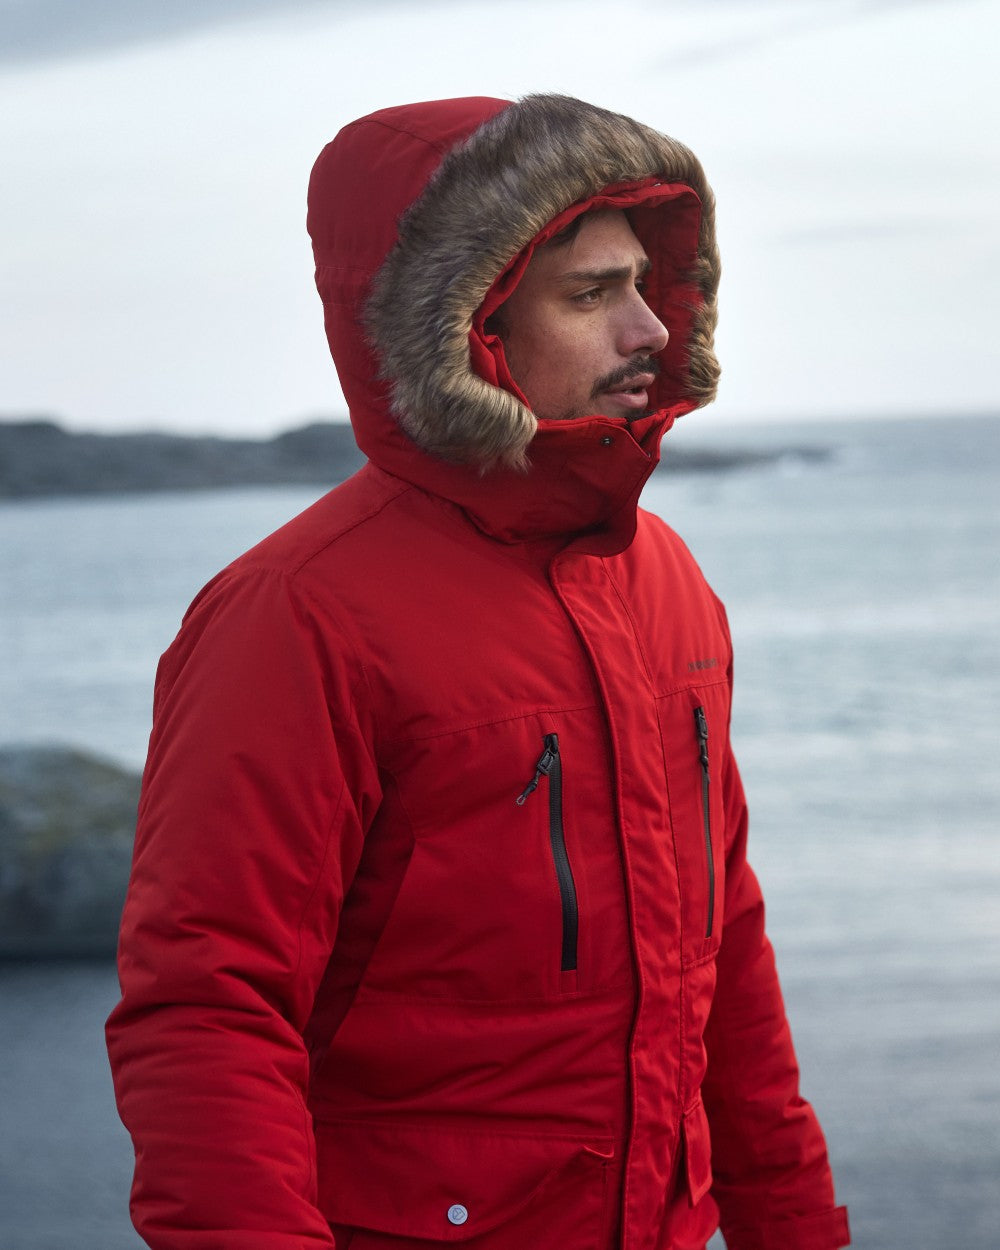 Didriksons Marco Parka 3 in Pomme Red 